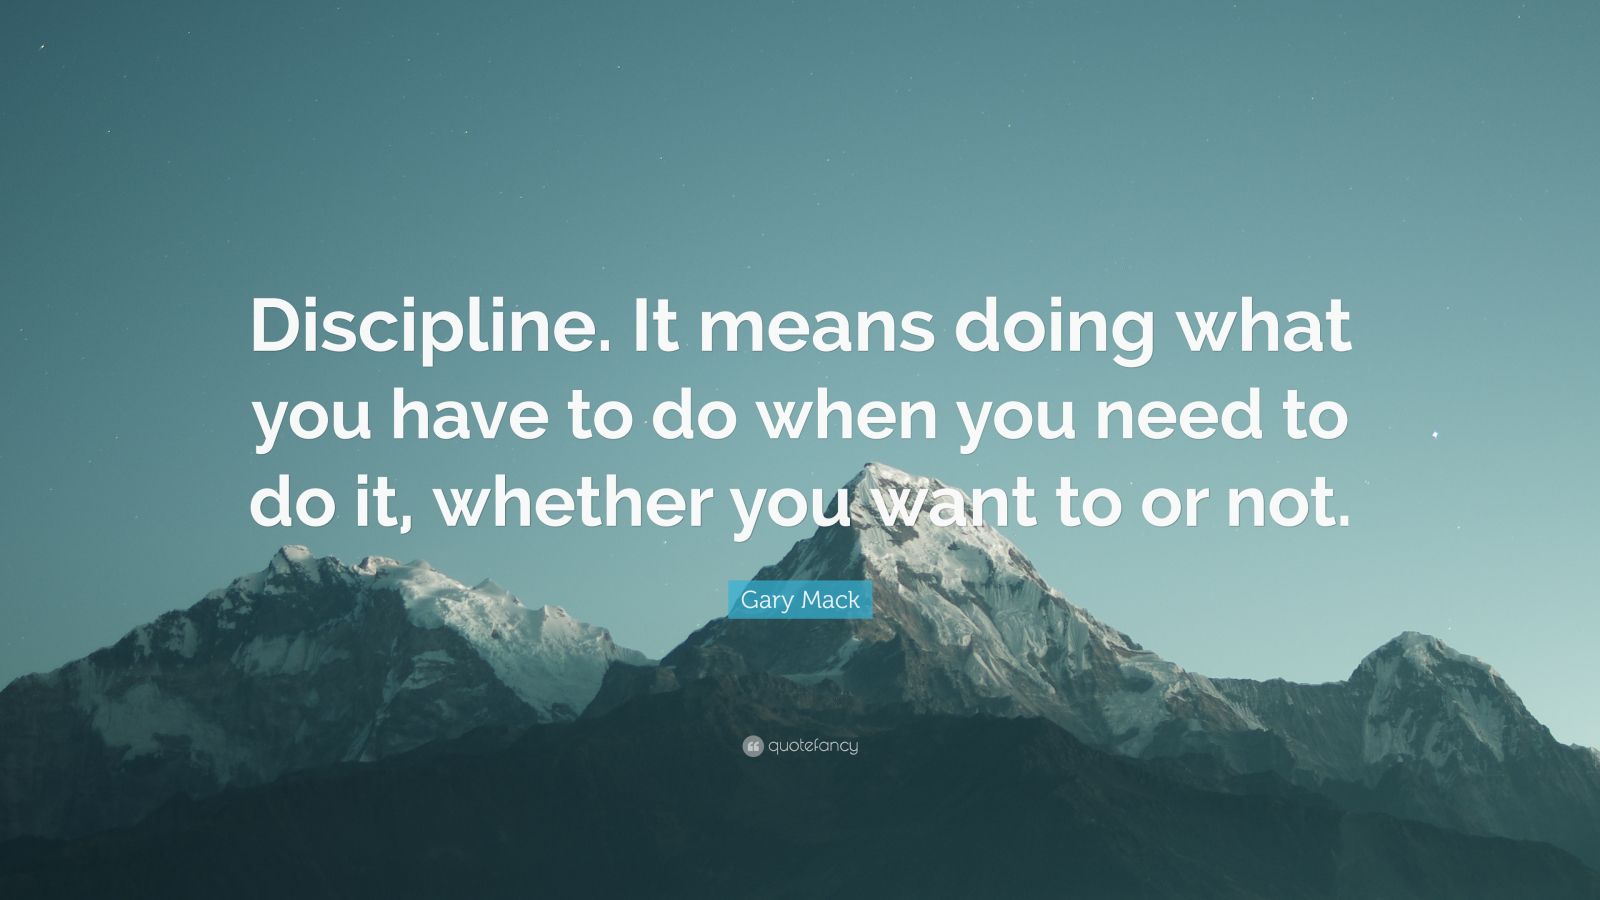 Gary Mack Quote: “Discipline. It means doing what you have to do when ...